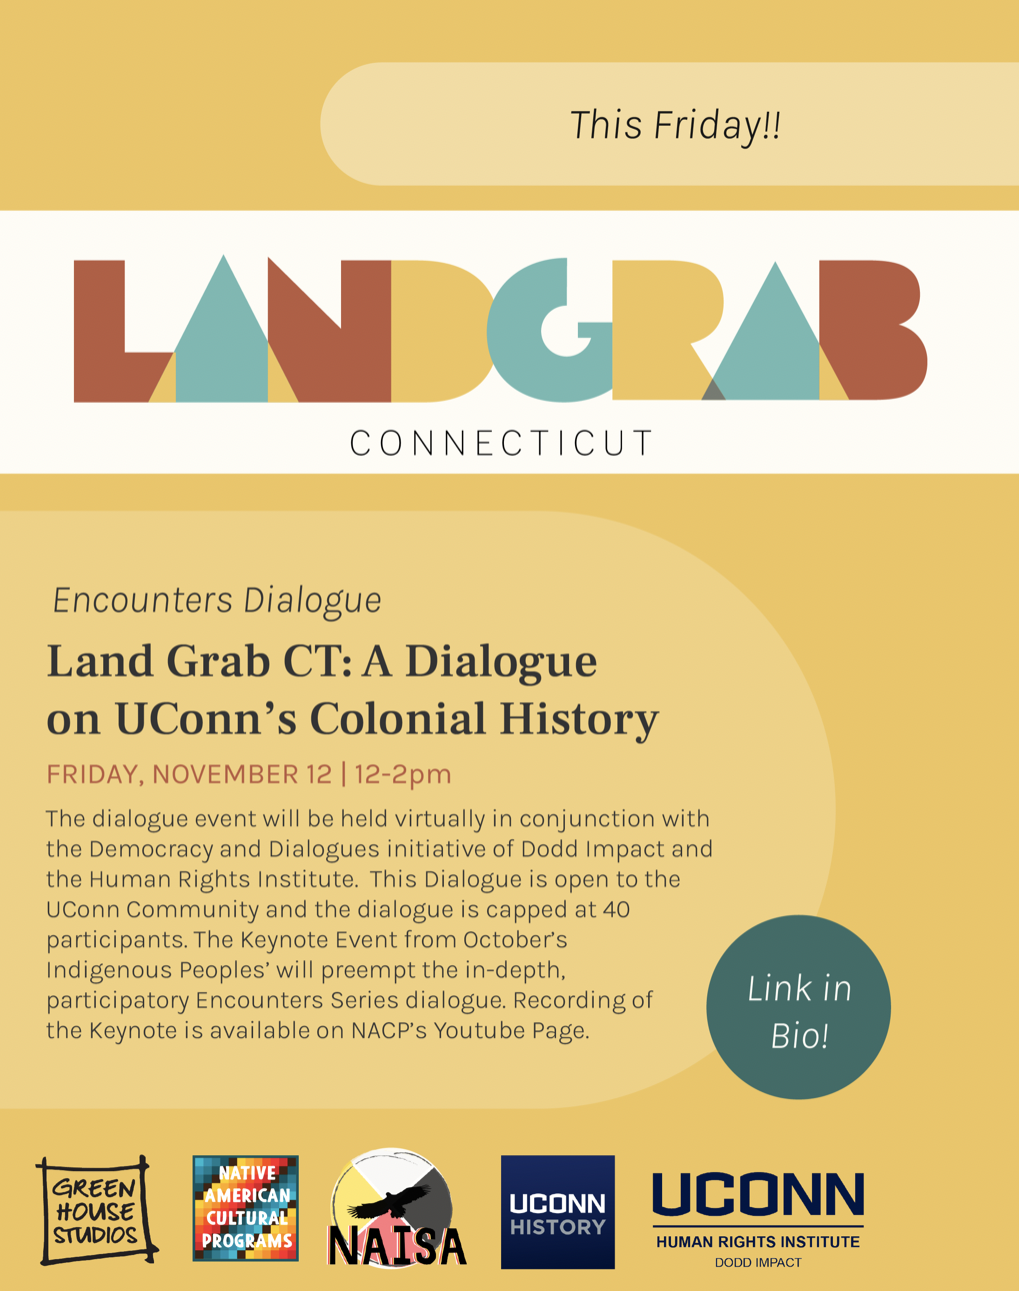 Land Grab CT: A Dialogue on UConn’s Colonial History